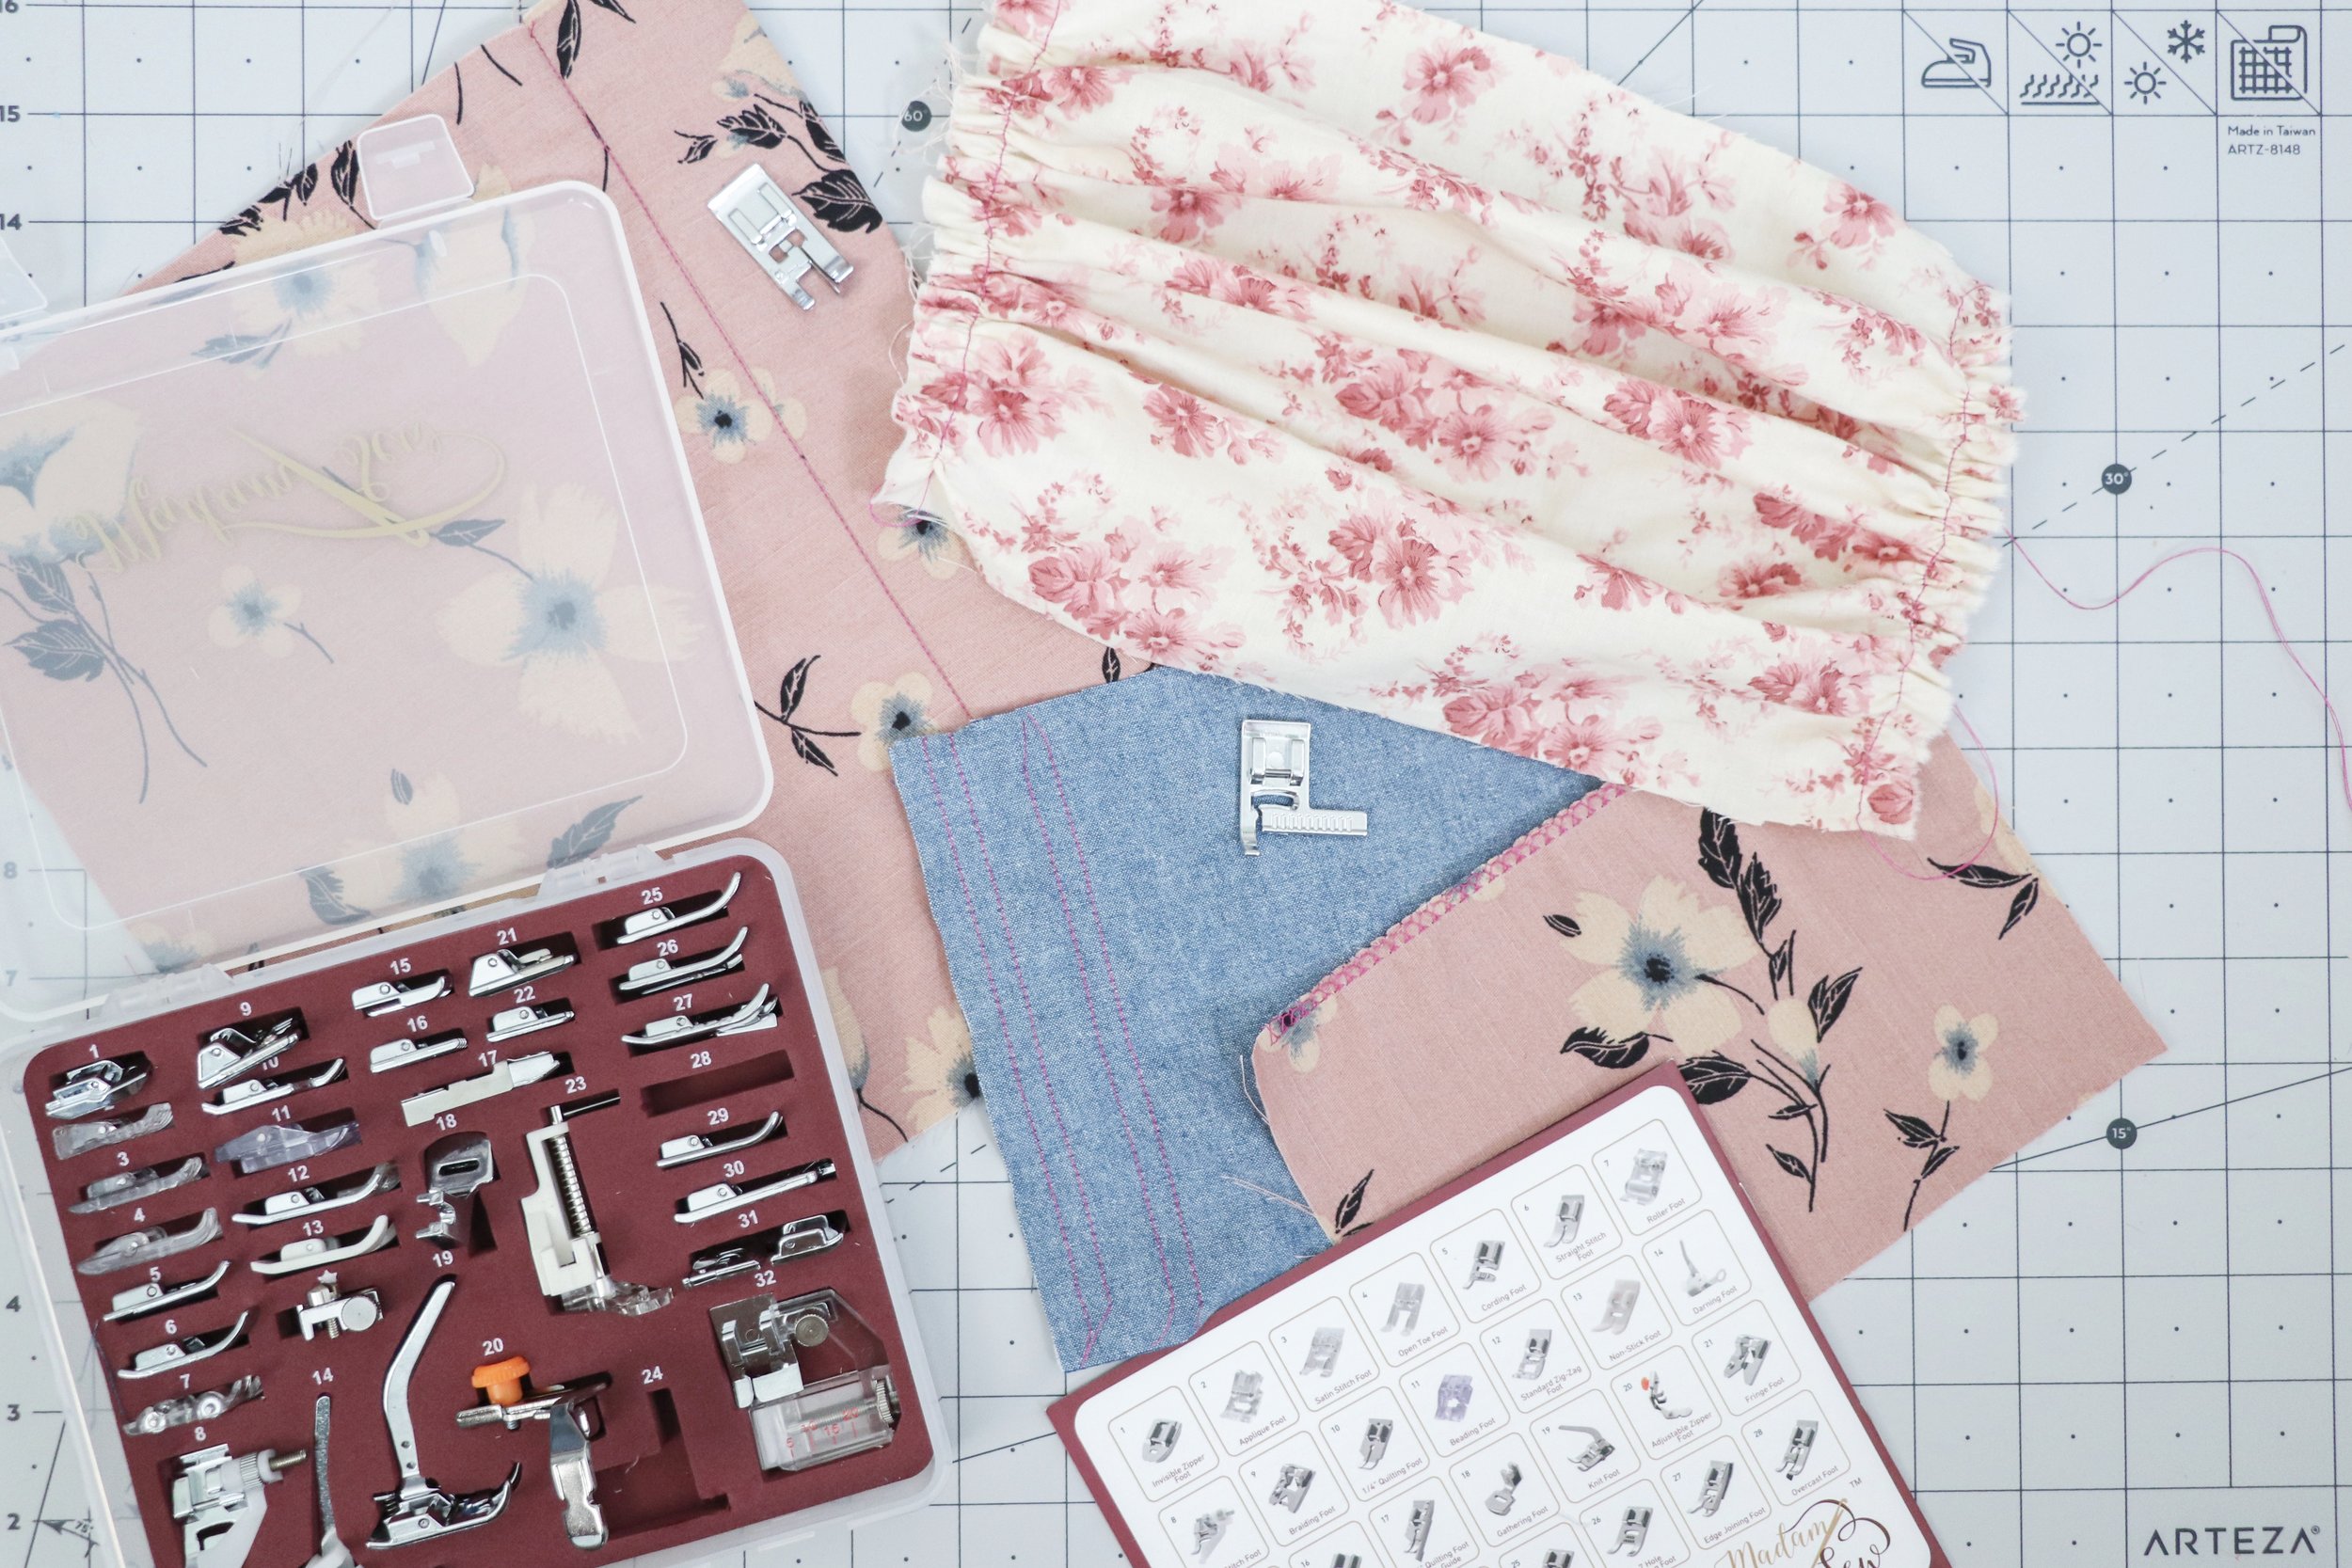 Review of Madam Sew Presser Feet Set - The Sewing Directory